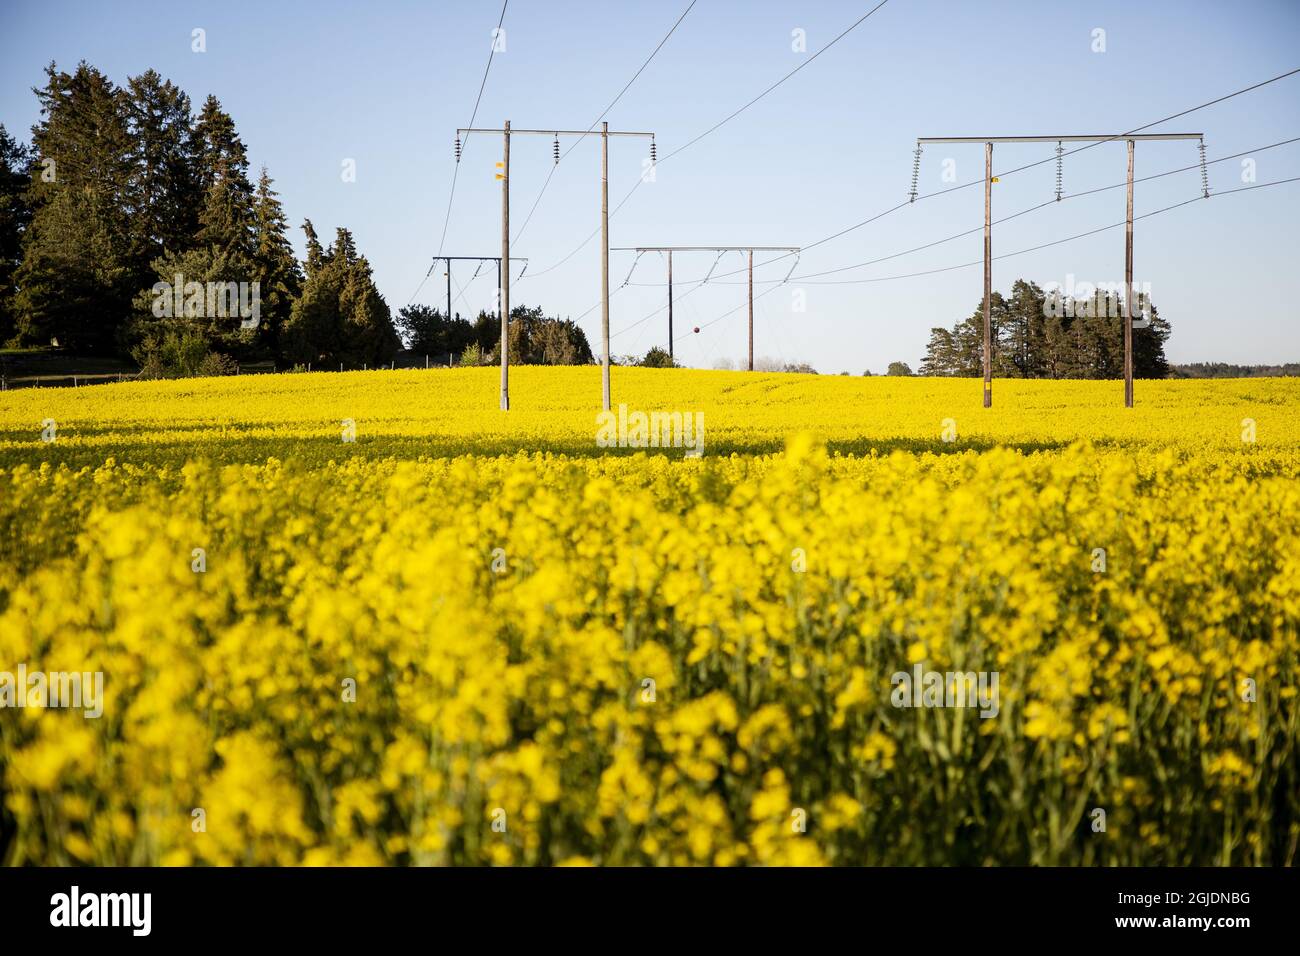 Power lines above a yellow rapeseed field Photo: Christine Olsson / TT / code 11086  Stock Photo